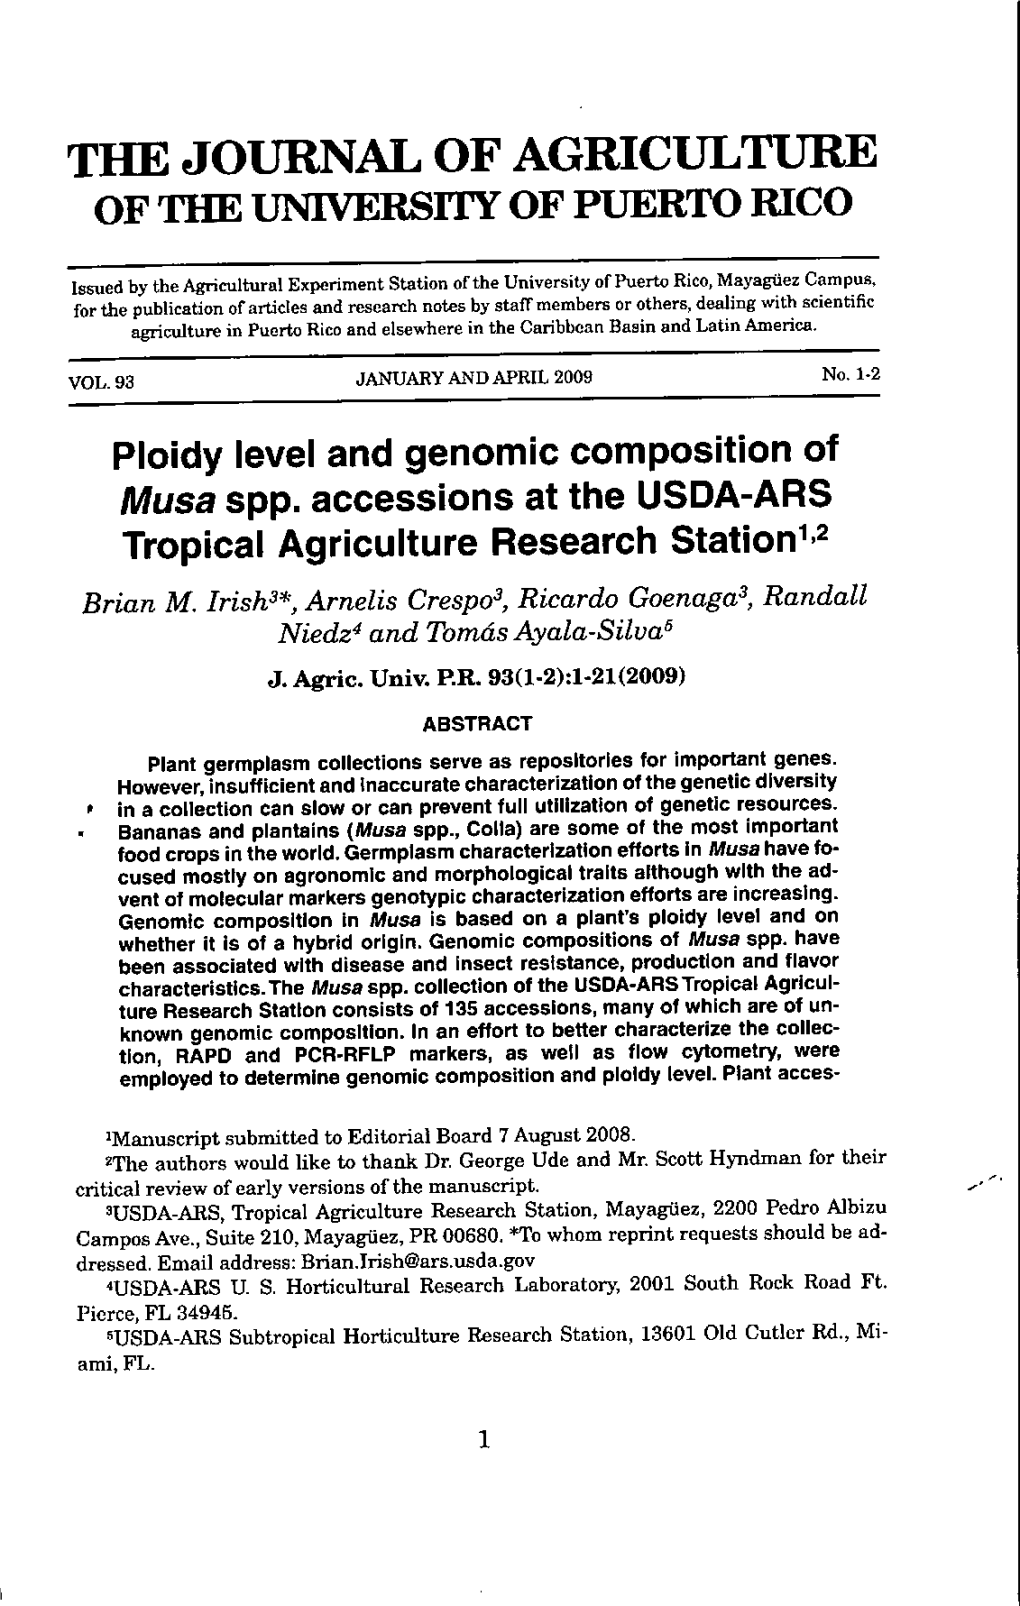 Ploidy Level and Genomic Composition of Musa Spp. Accessions at the USDA-ARS Tropical Agriculture Research Station1'2 Brian M